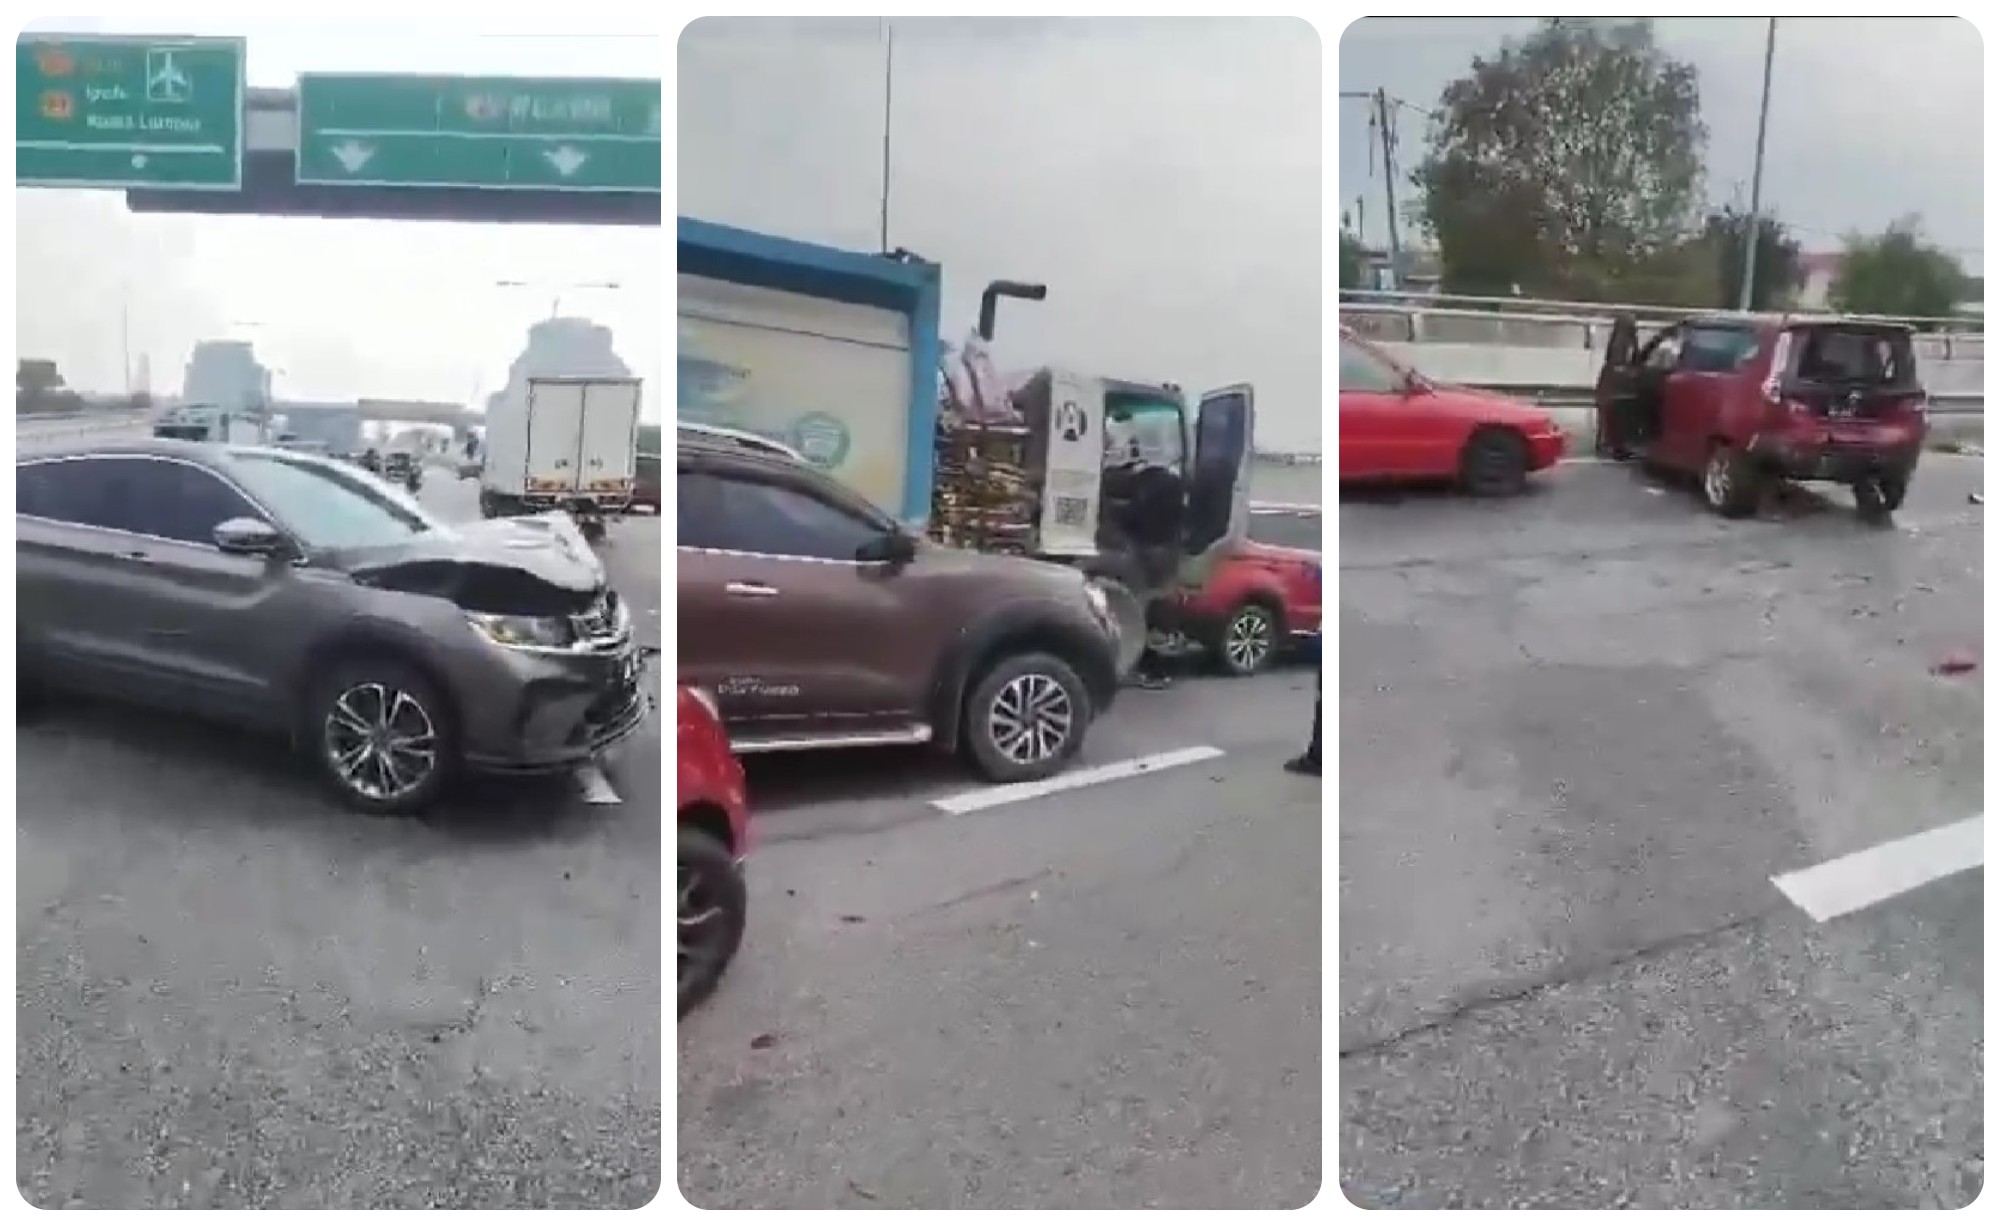 [UPDATED] Chaos on Federal Highway: over 10 vehicles in massive crash